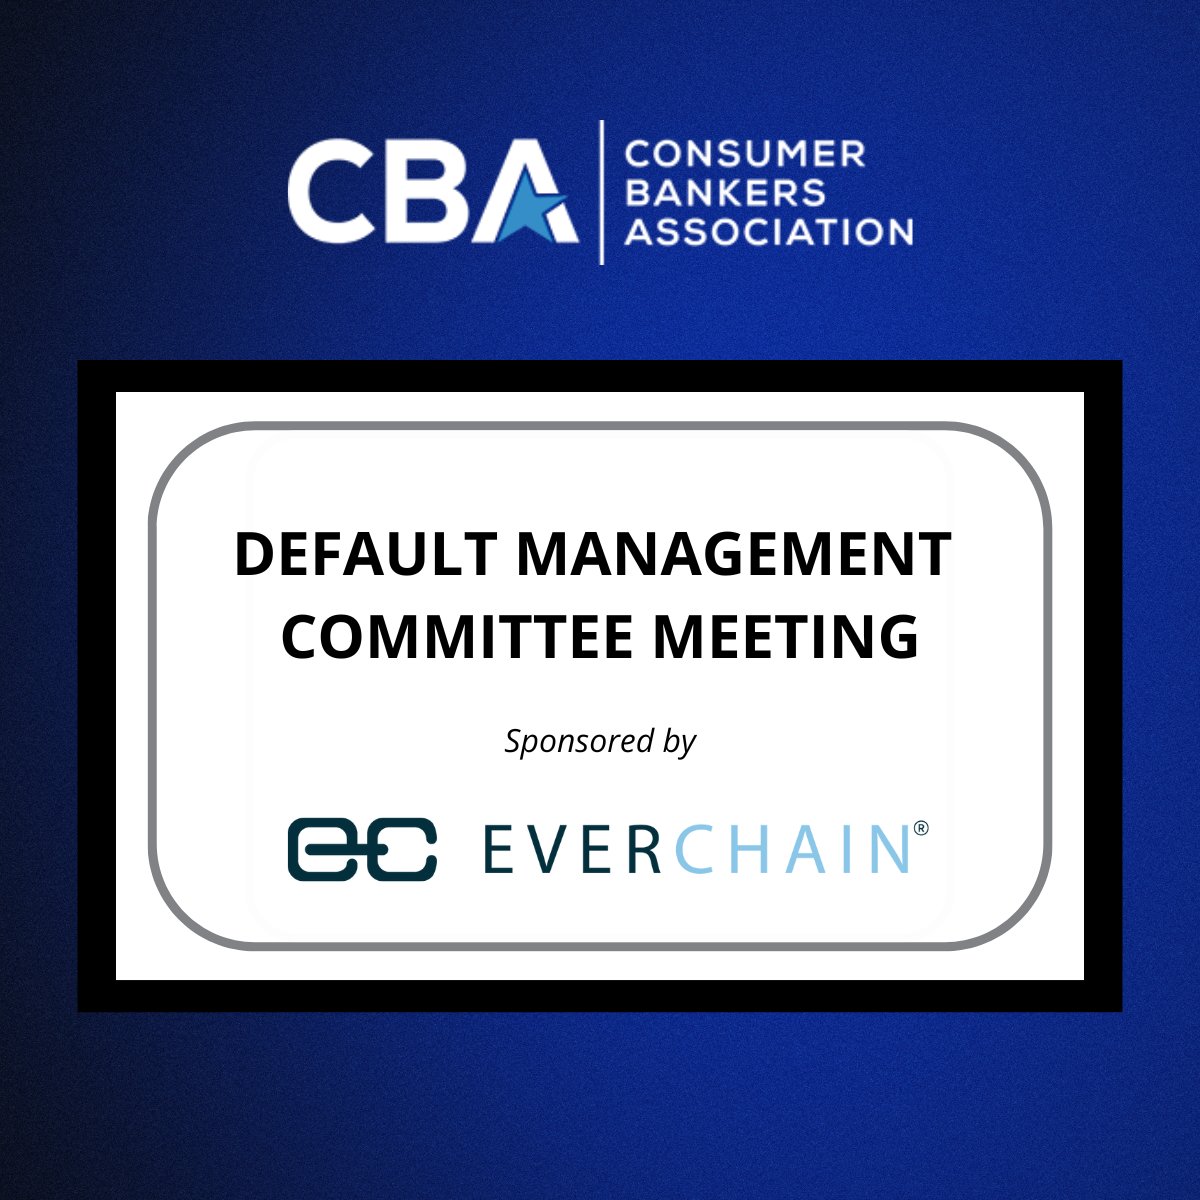 EverChain is the proud sponsor of the Default Management Committee Meeting at #CBALive2024 in Washington, DC! As leaders in financial solutions, we're dedicated to supporting the banking community's efforts in managing defaults effectively.
🔗 hubs.ly/Q02qy-zn0